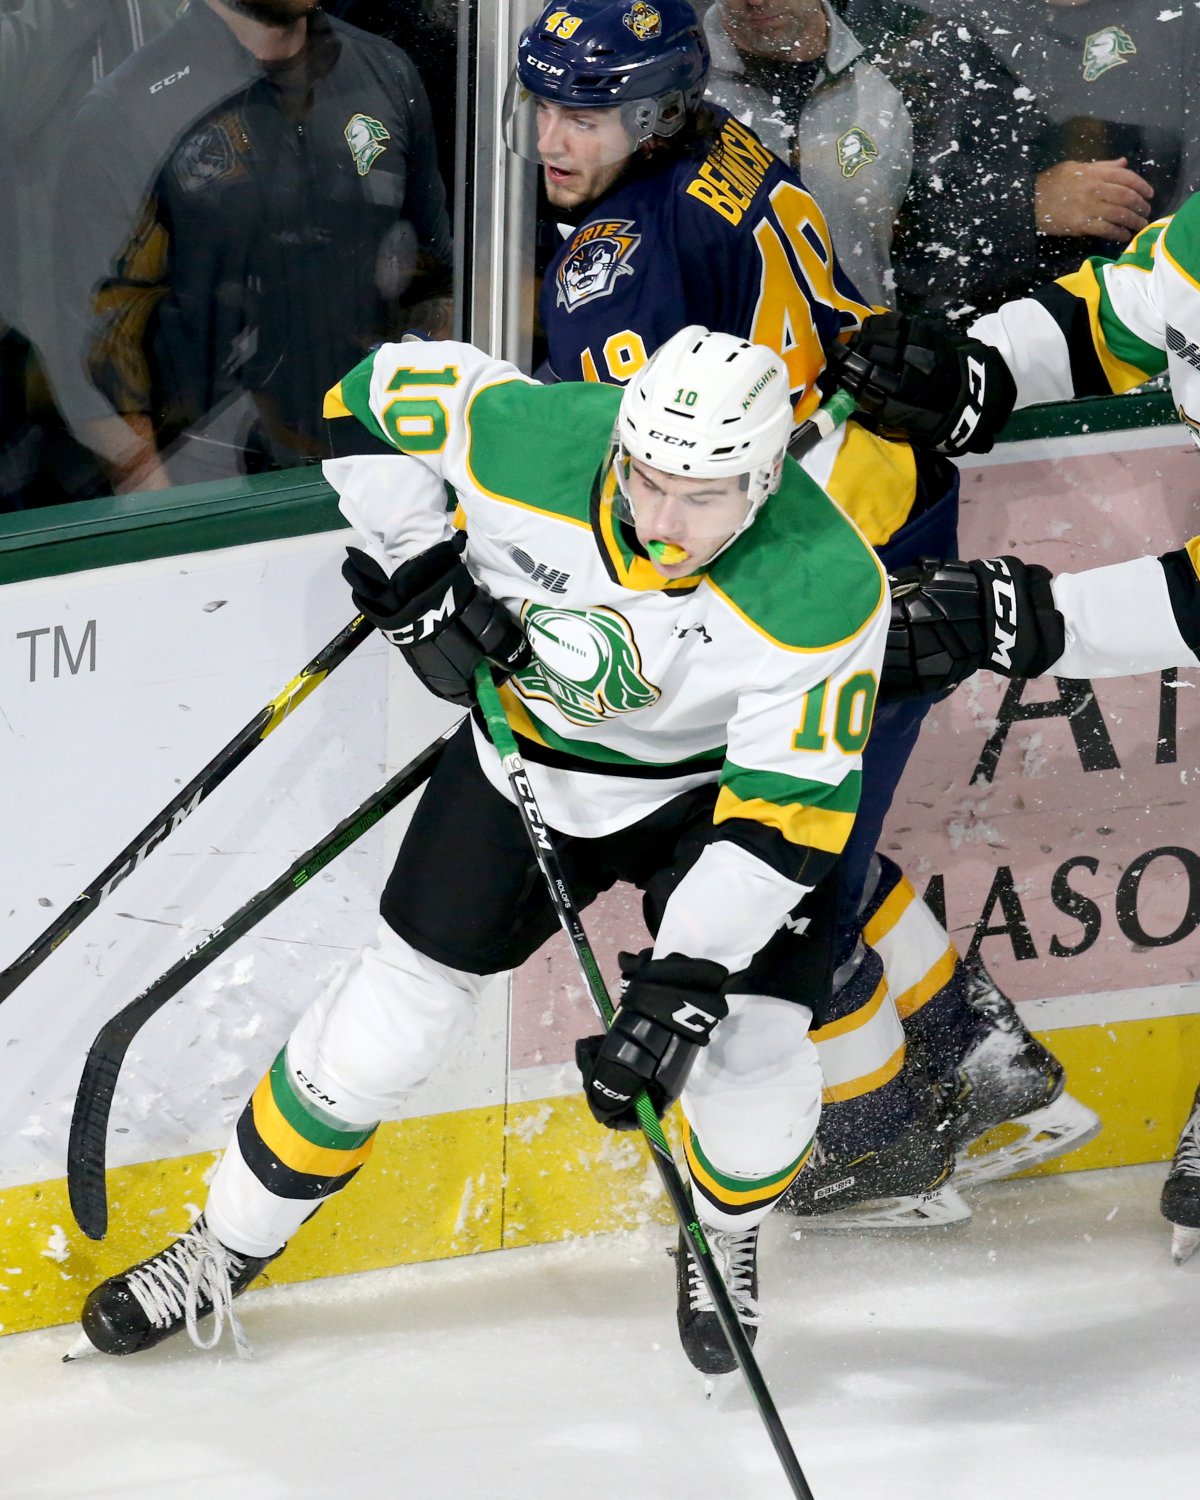 MARNER NAMED OHL PLAYER OF THE WEEK - London Knights